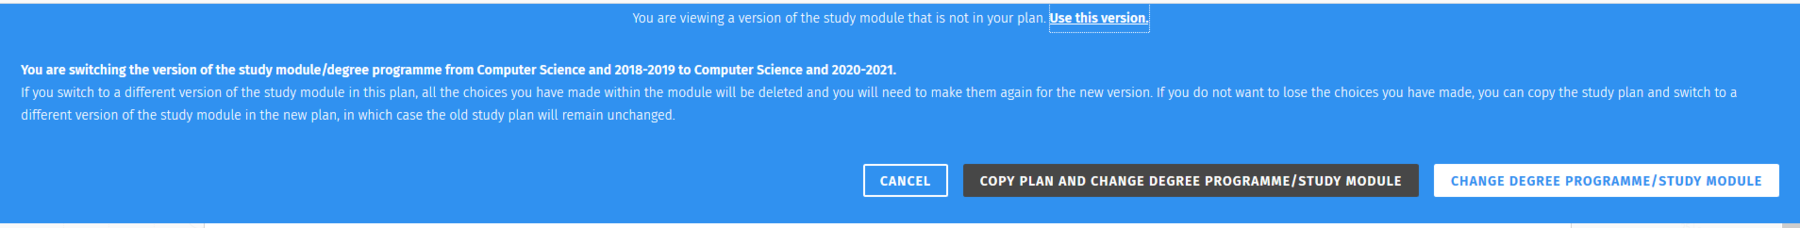 Select whether to create a copy of your study plan